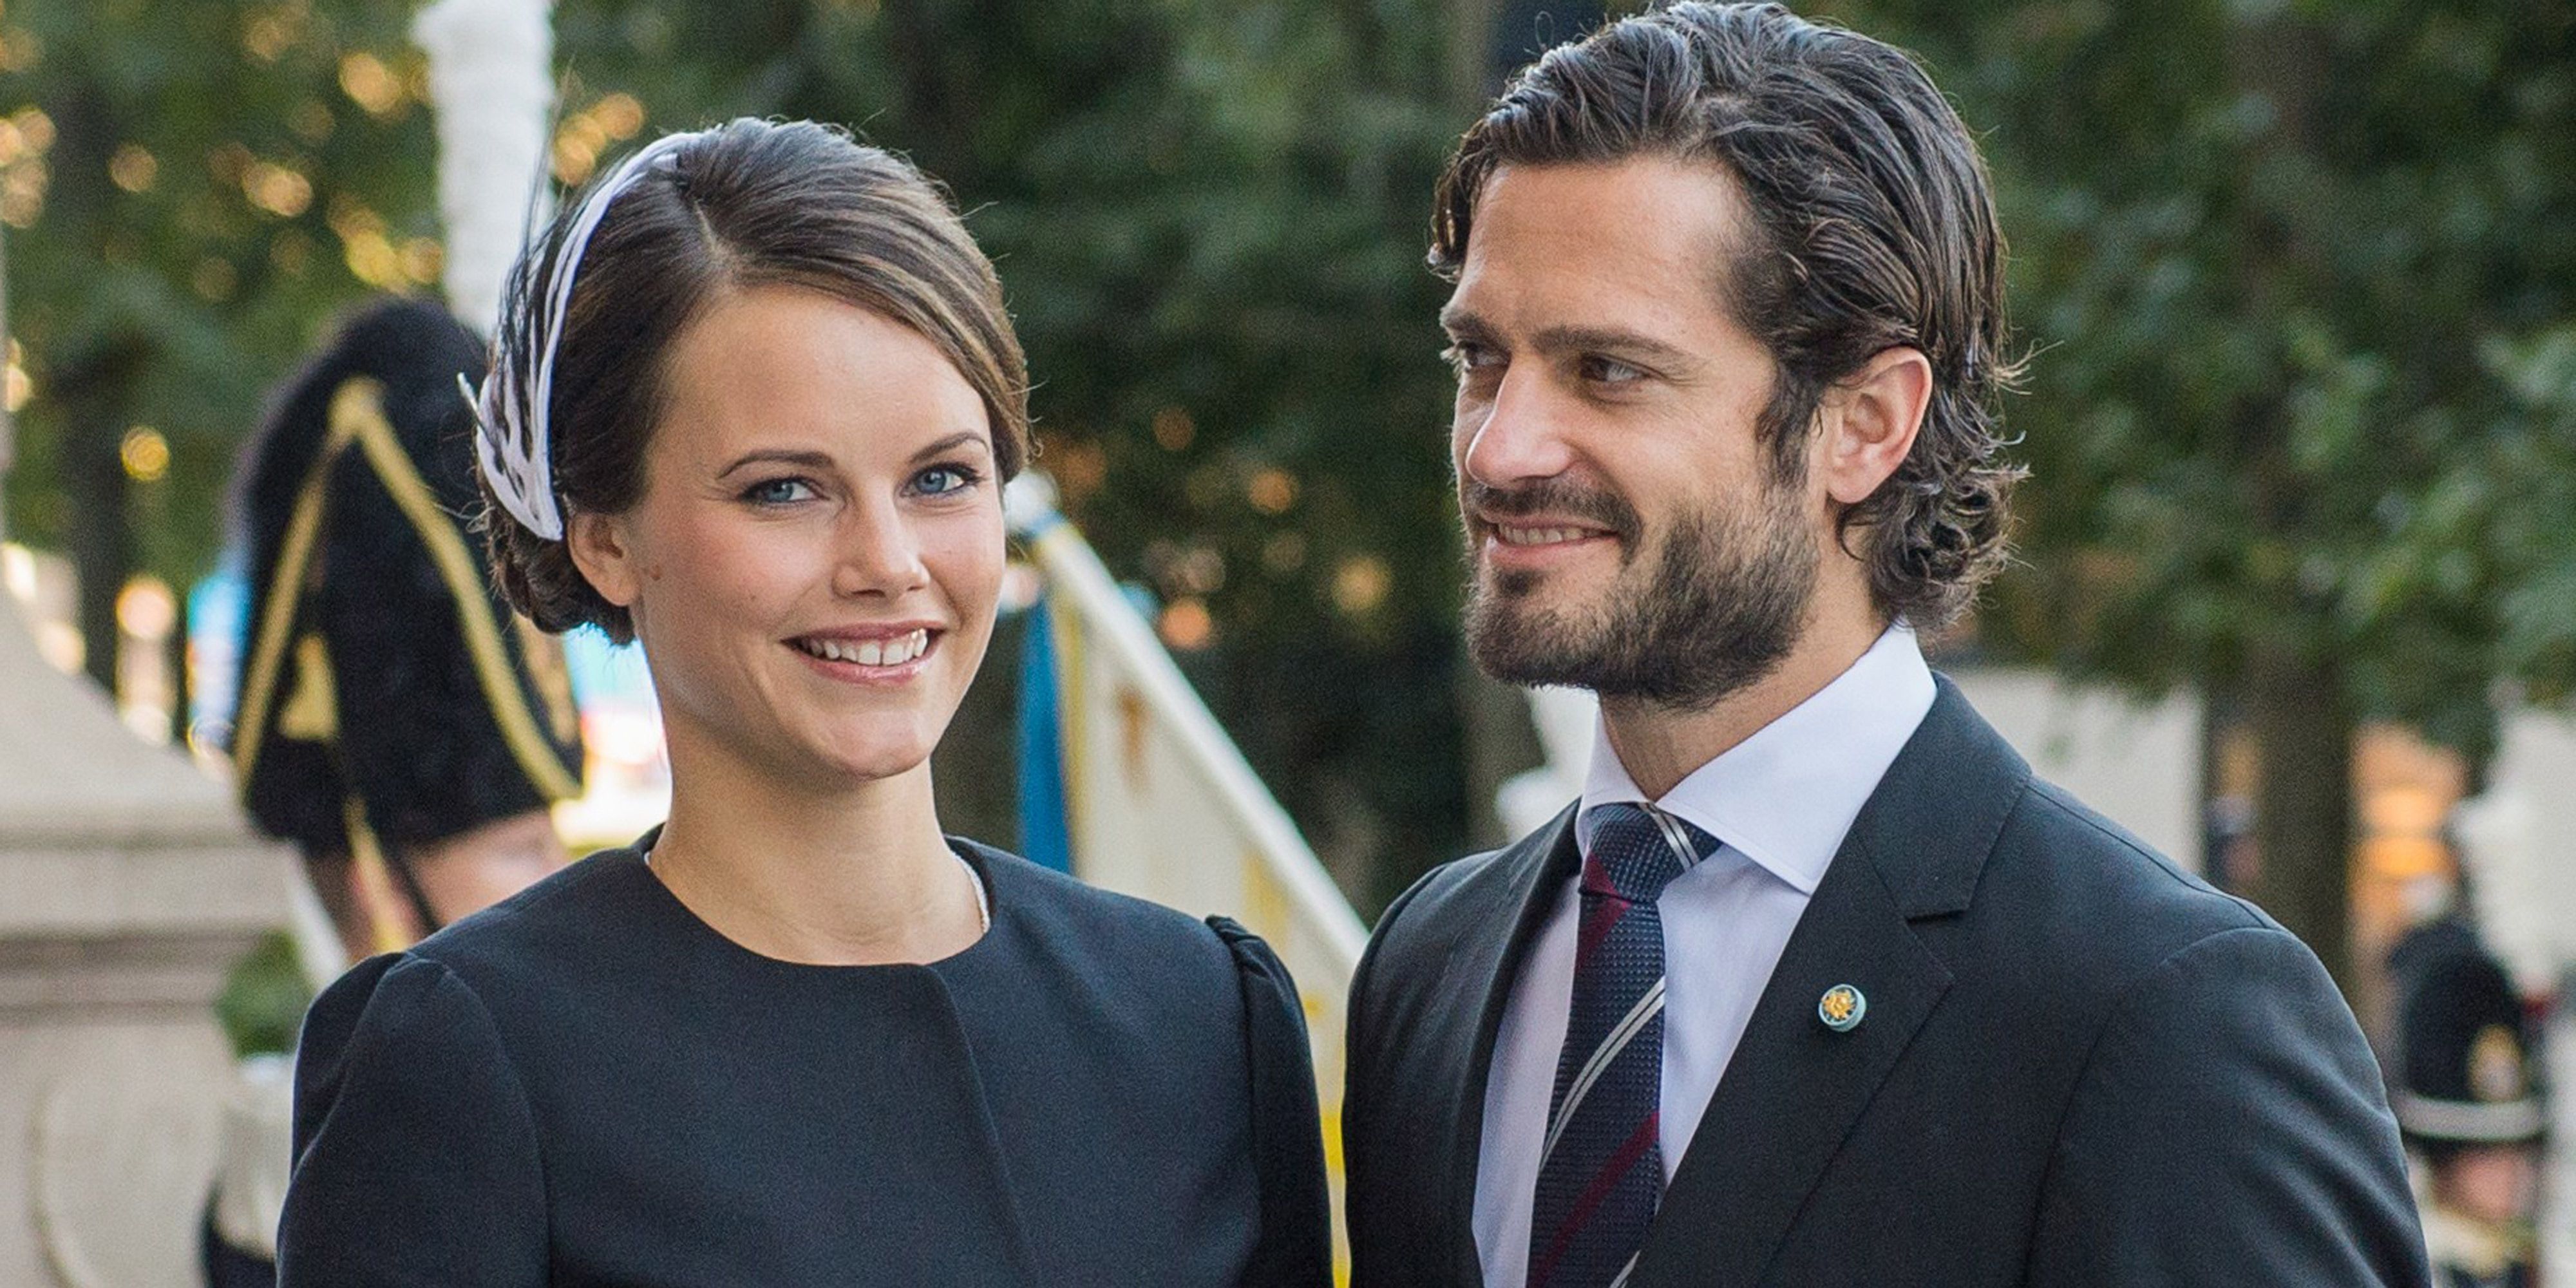 Here's What You Need To Know About The Future Princess of Sweden